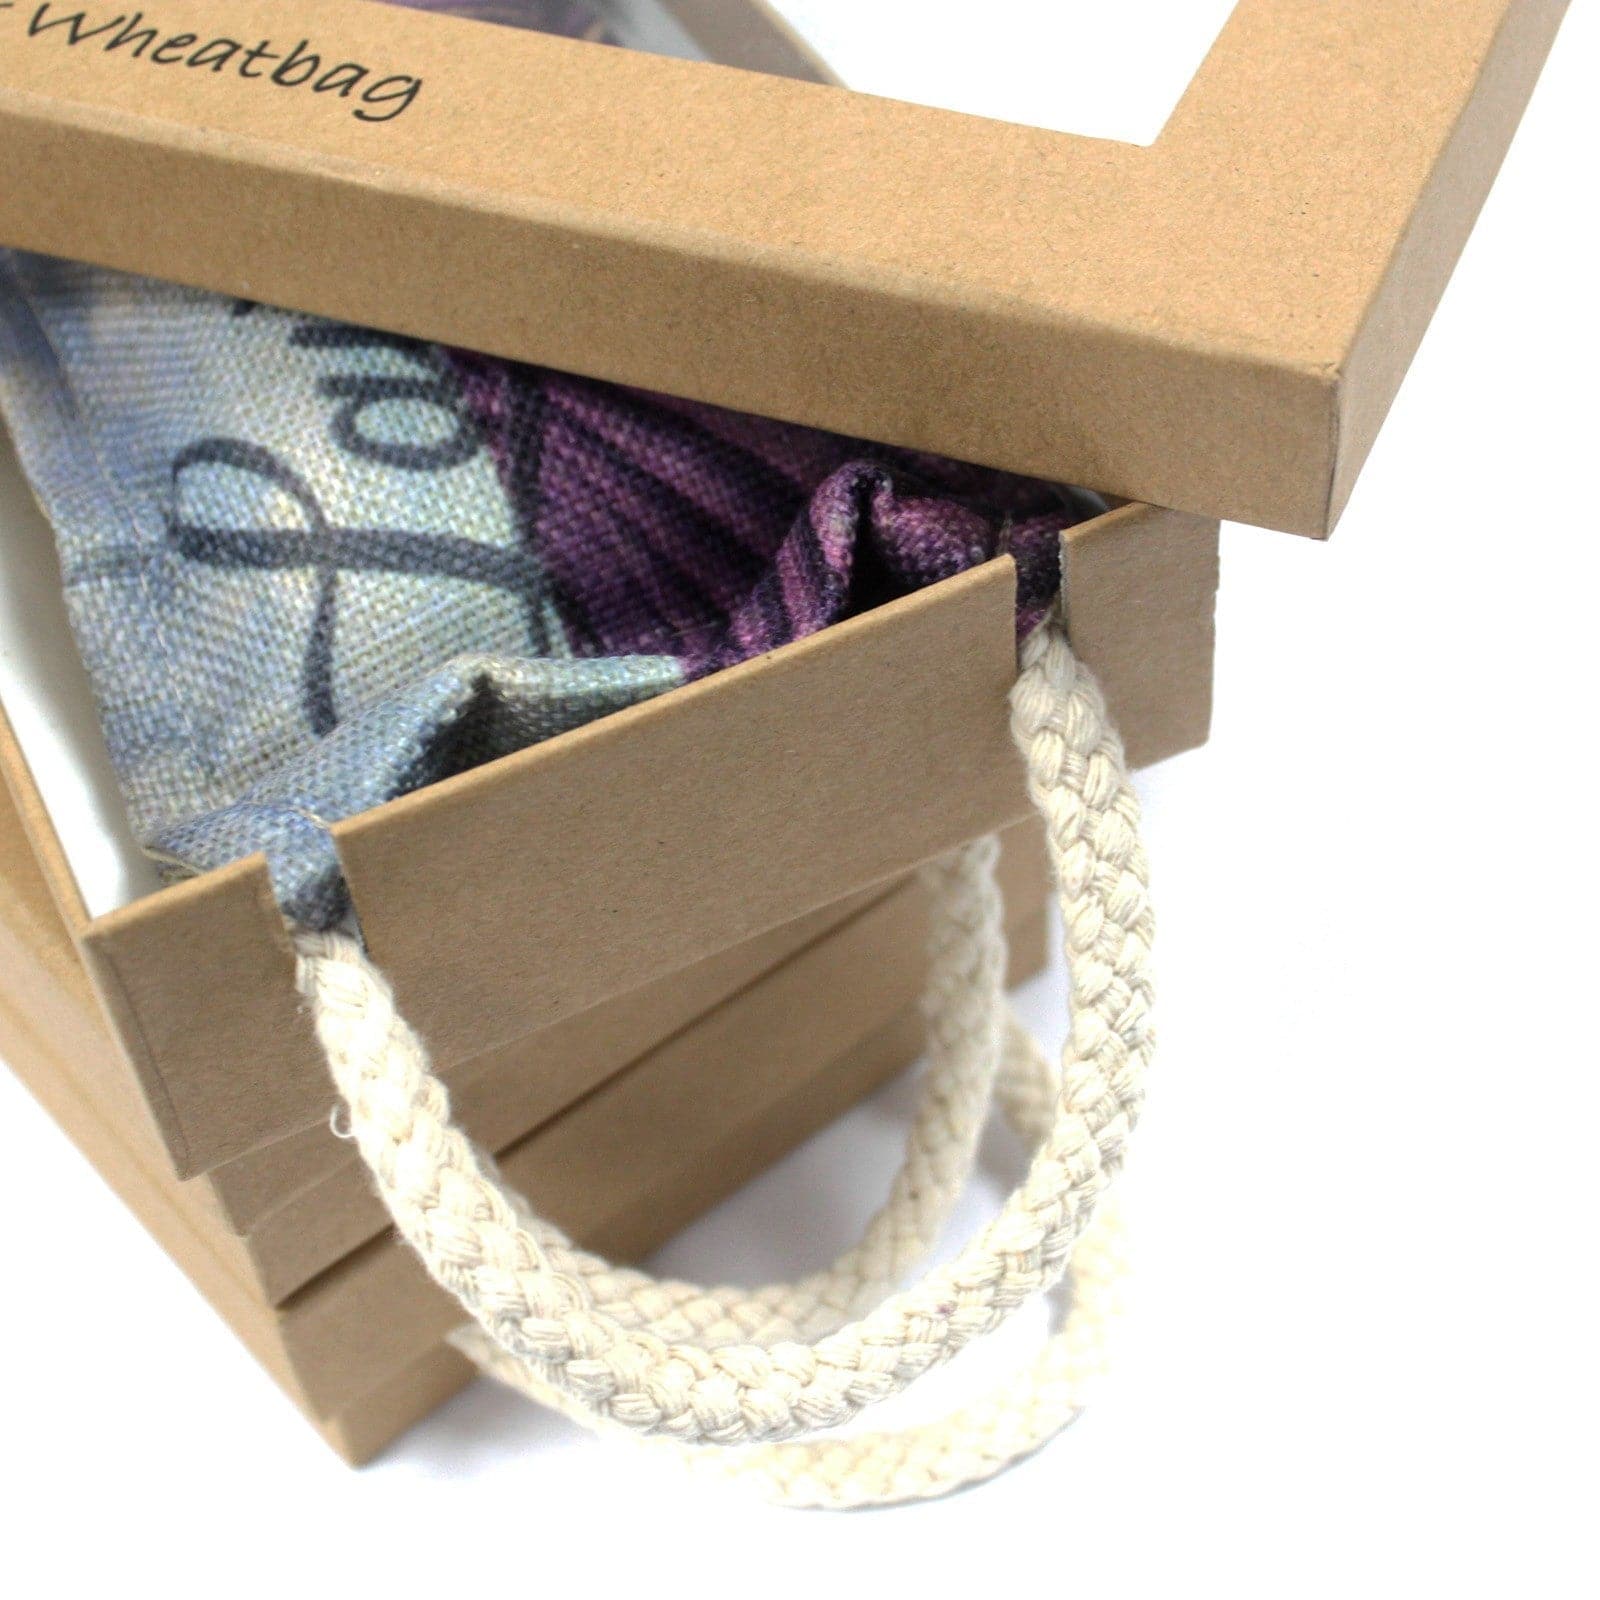 Luxury Lavender Wheat Bag in Gift Box - Butterfly & Roses - best price from Maltashopper.com AWHBL-03